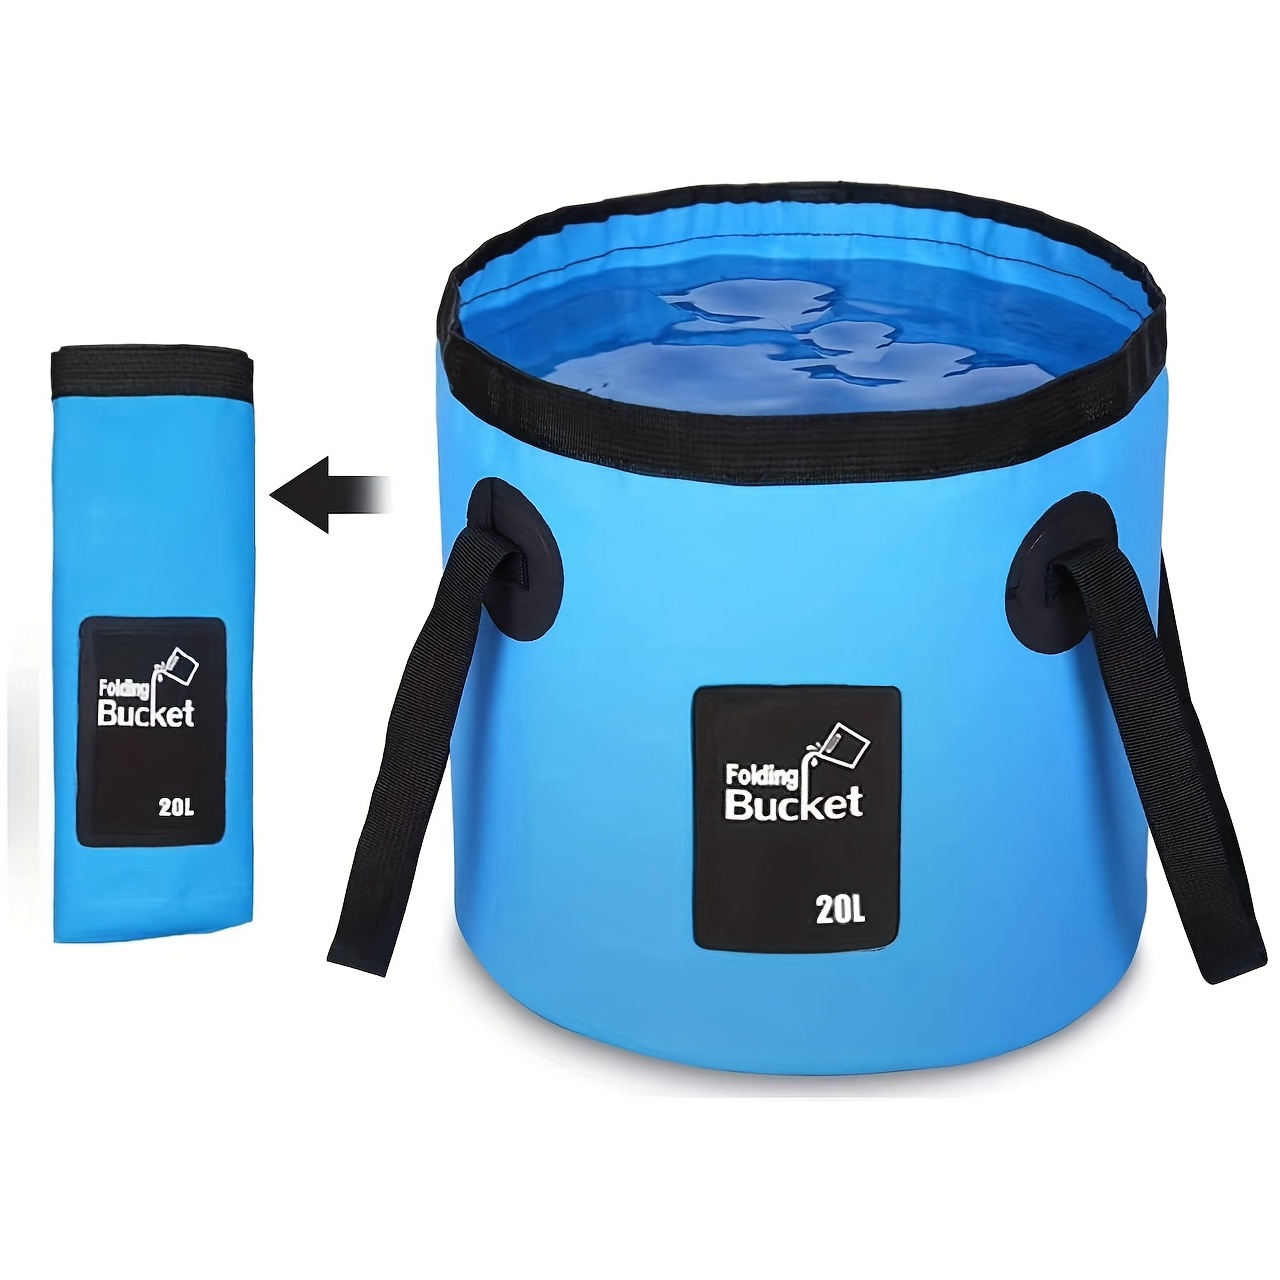 Experience Portable Versatility with Collapsible Bucket Assorted